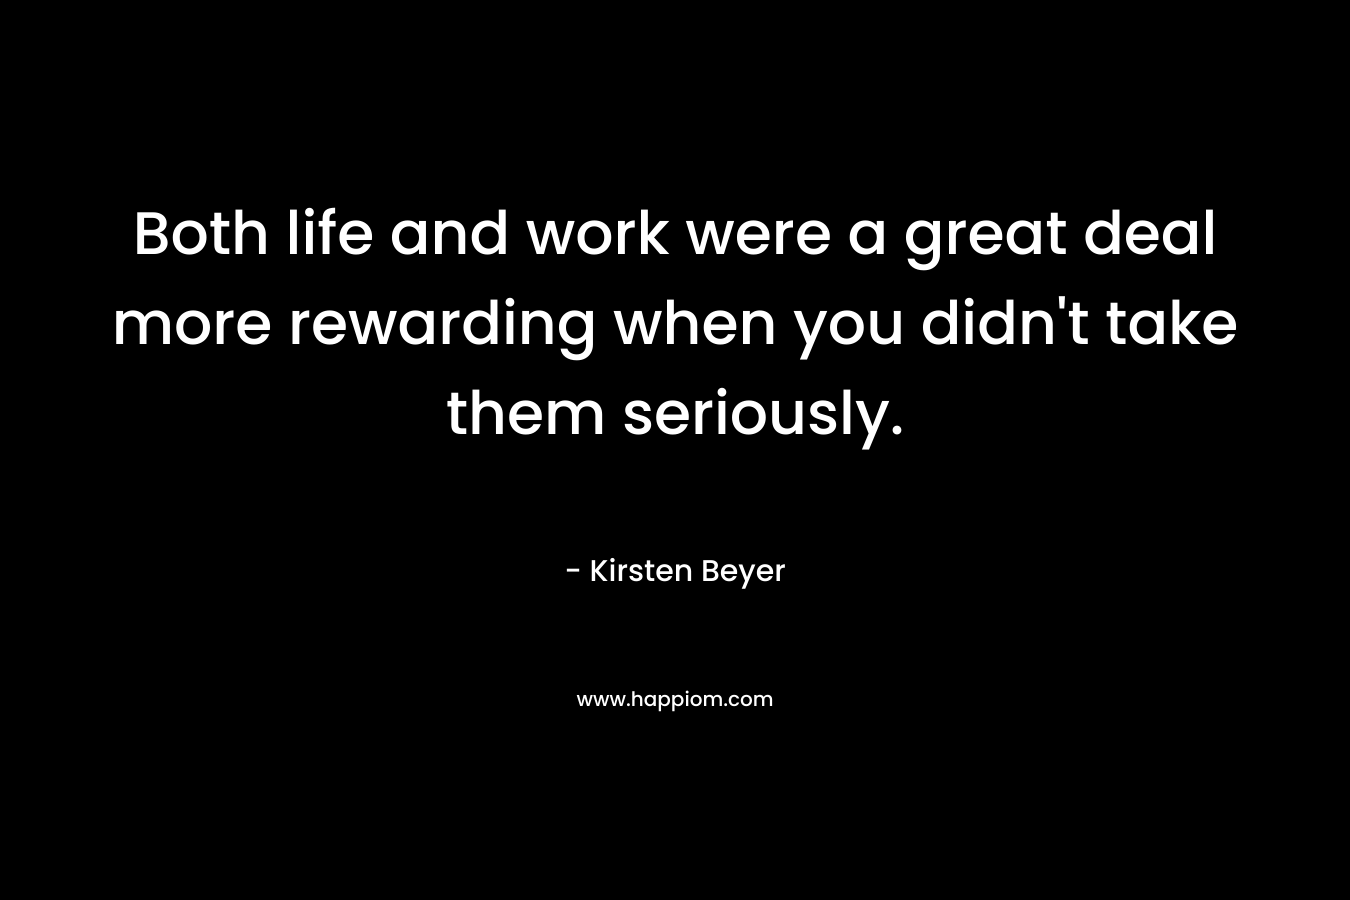 Both life and work were a great deal more rewarding when you didn't take them seriously.